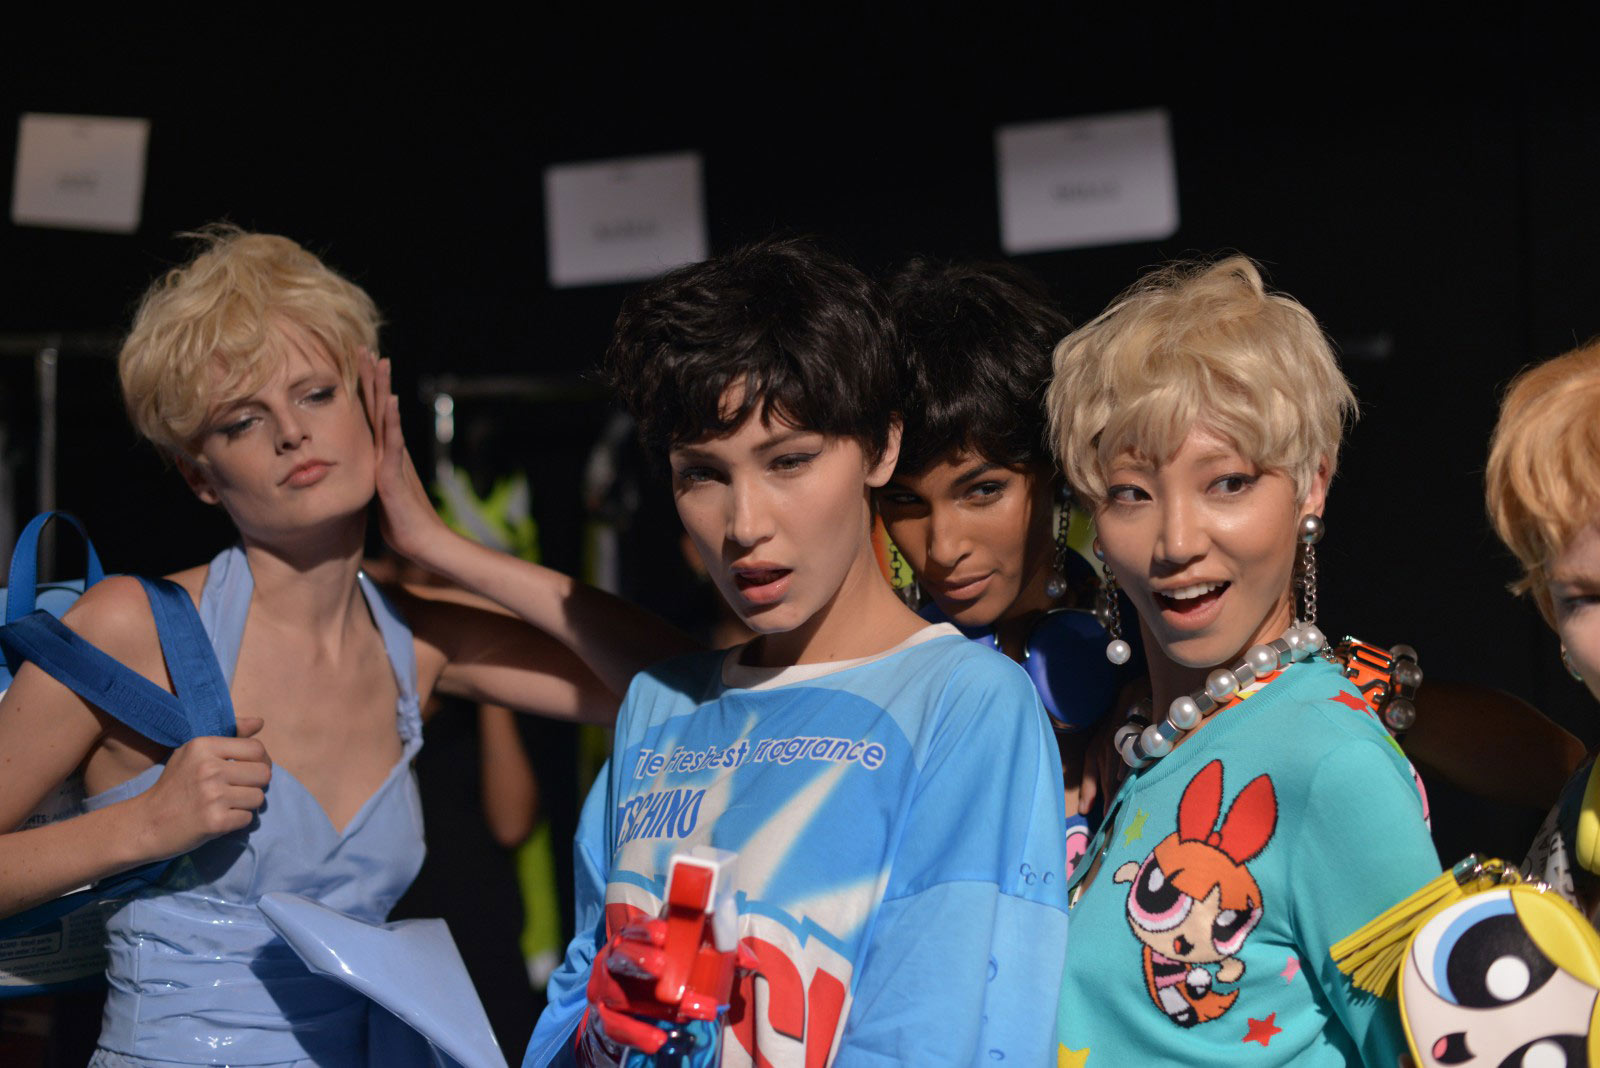 Bella Hadid and her co-models backstage having fun